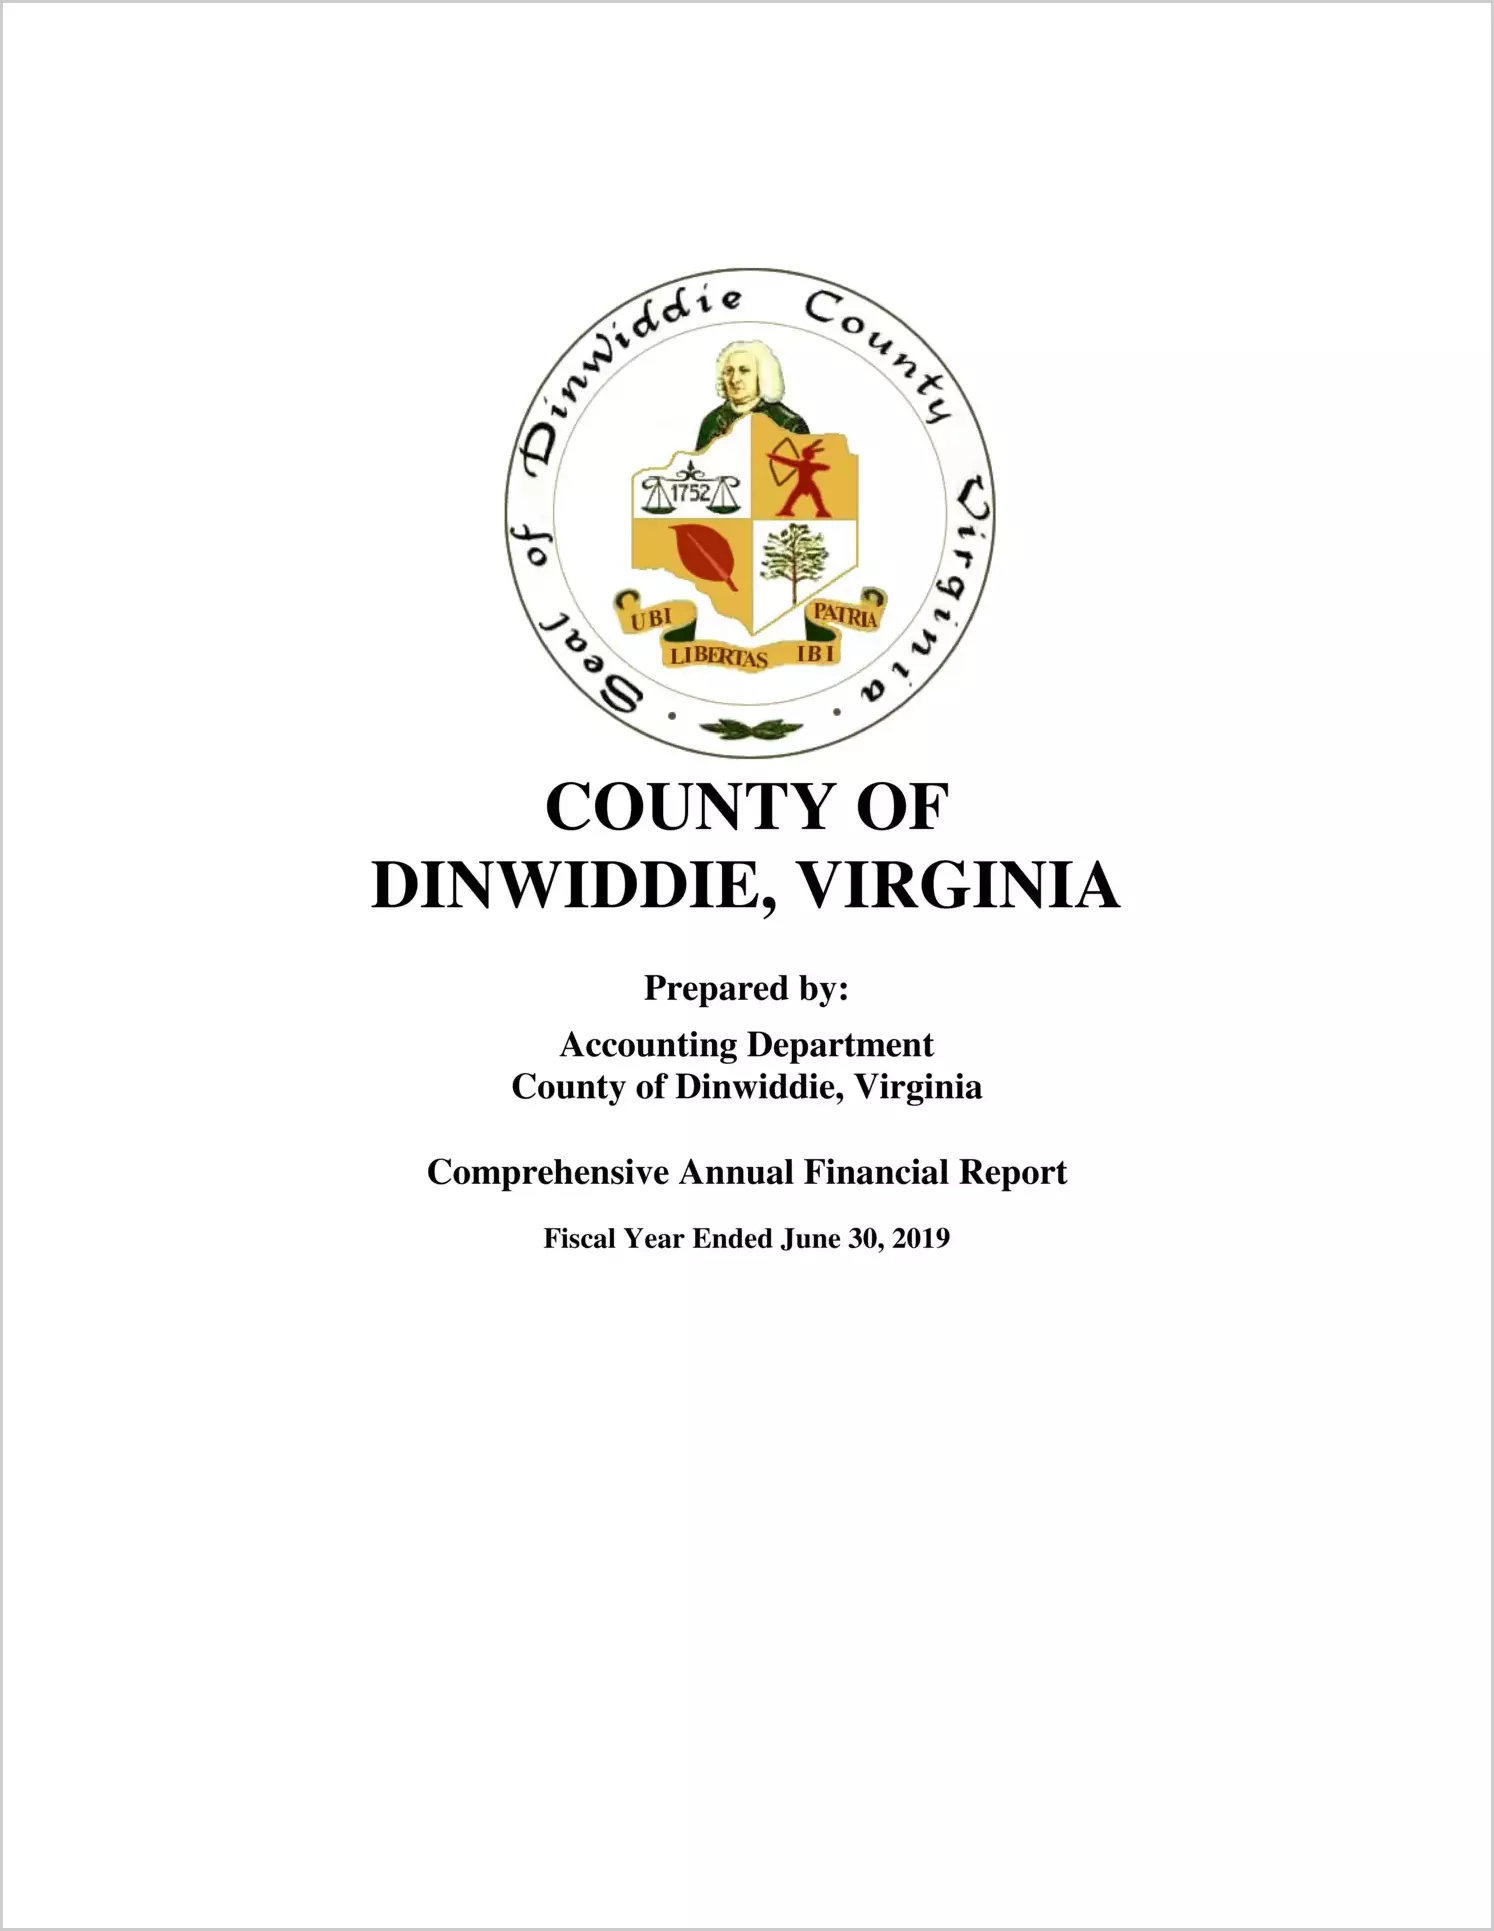 2019 Annual Financial Report for County of Dinwiddie